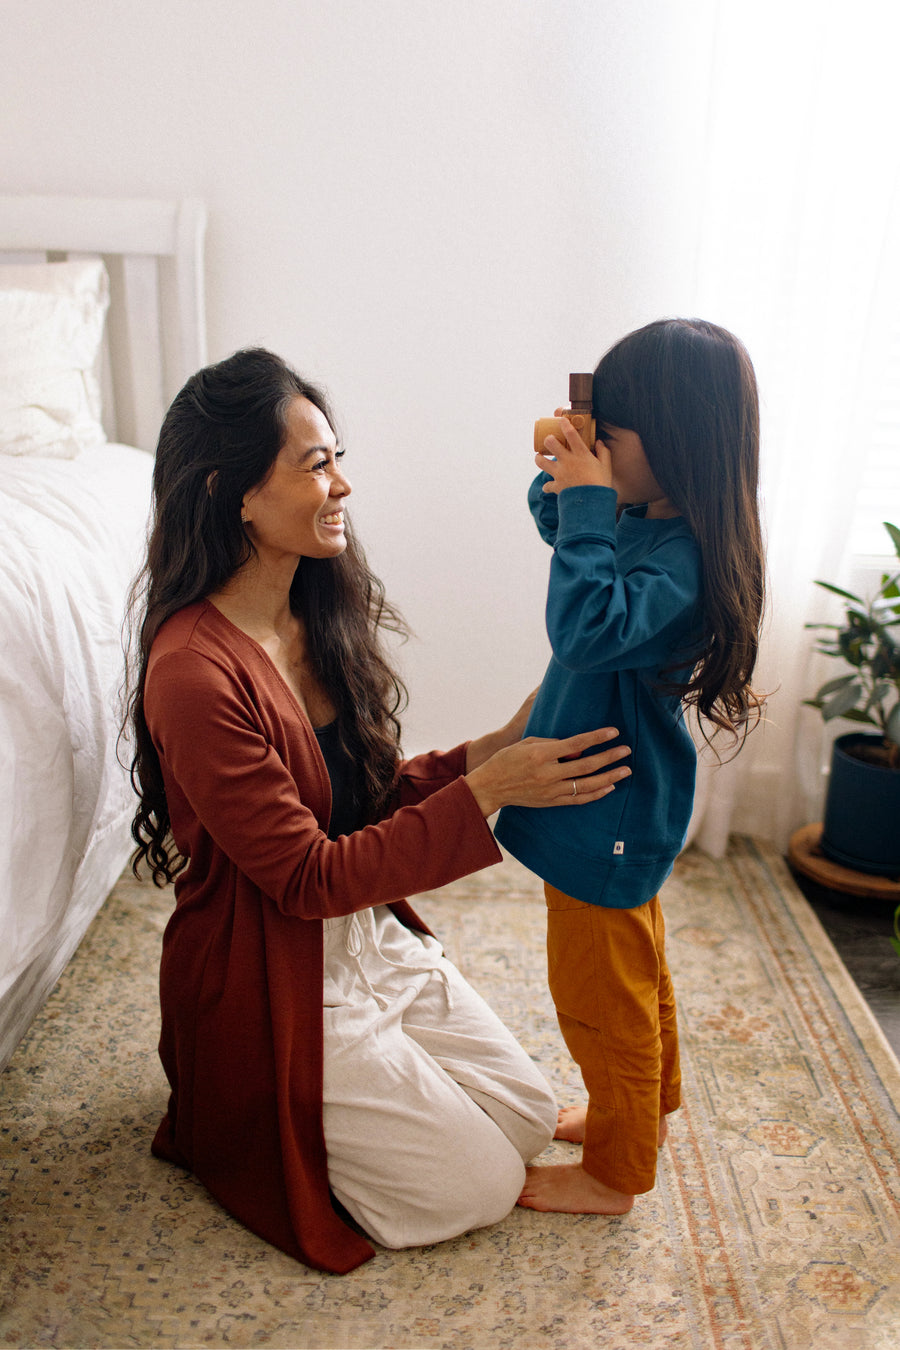 woman wearing a long cardigan and loungewear sitting on the floor with a young girl who is holding a camera